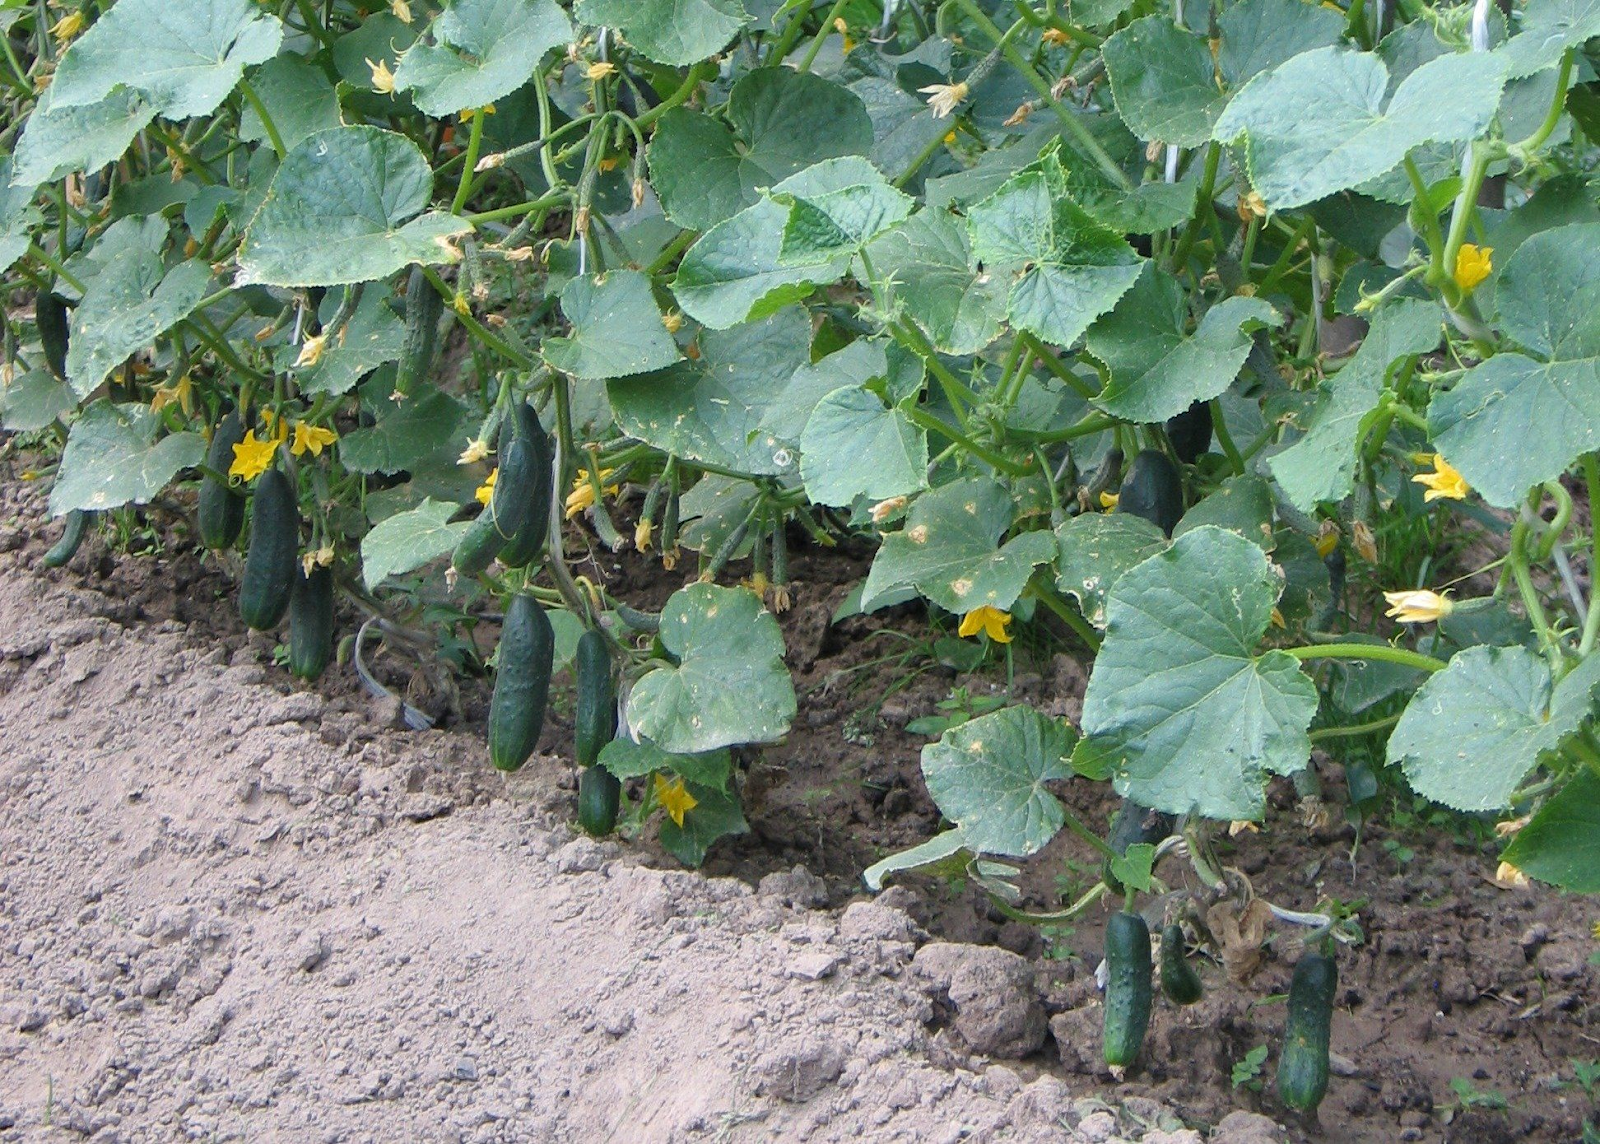 cucumber plant leaf with wilting and yellowing caused by bacterial wilt disease."